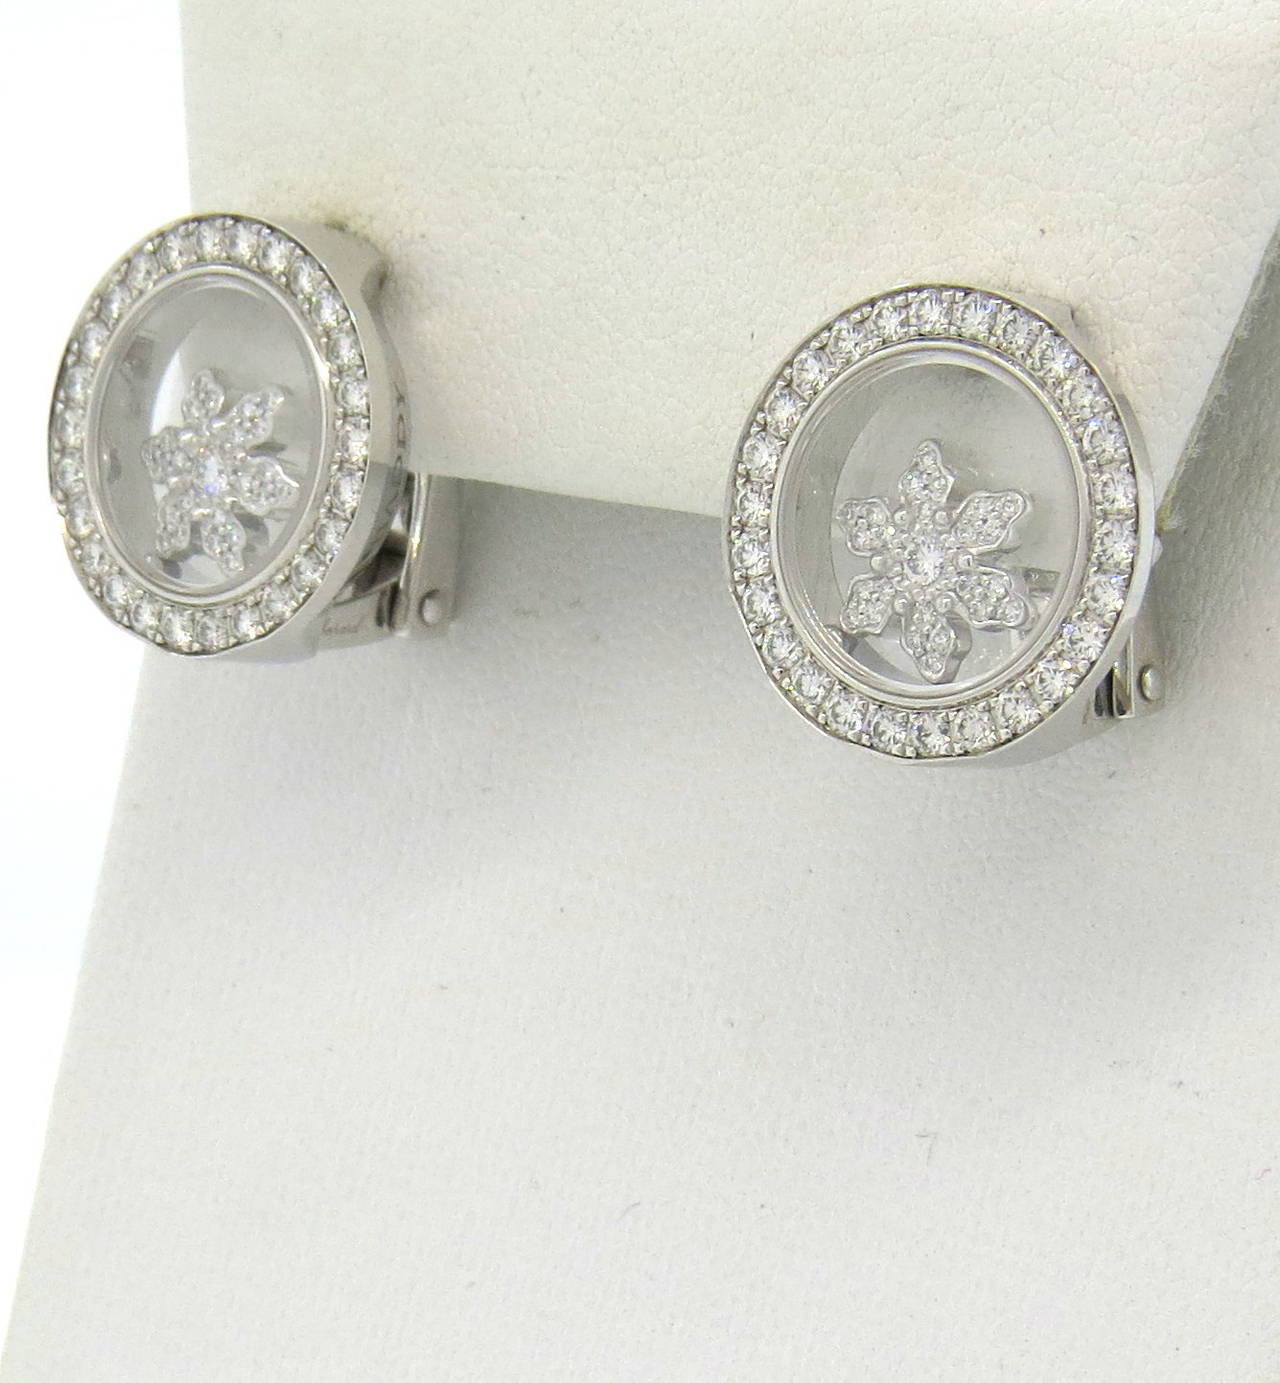 A pair of new Chopard 18k white gold earrings, featuring signature floating diamonds in the center in a form of snowflake. Earrings measure 17mm in diameter. Diamond total weight is approximately 1.00ctw including the snowflakes. Marked